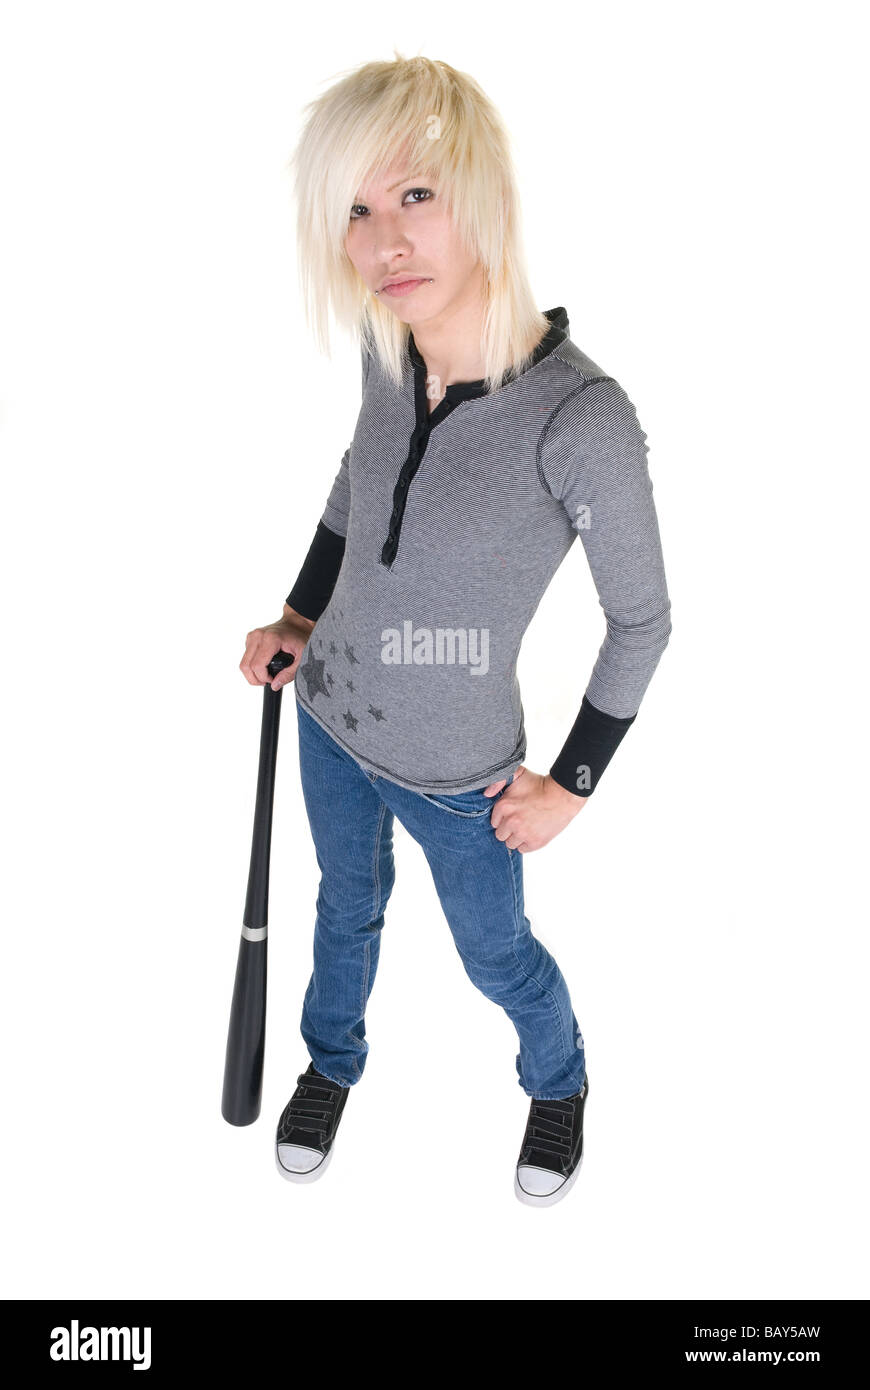 A man stands with the help of his baseball bat Stock Photo